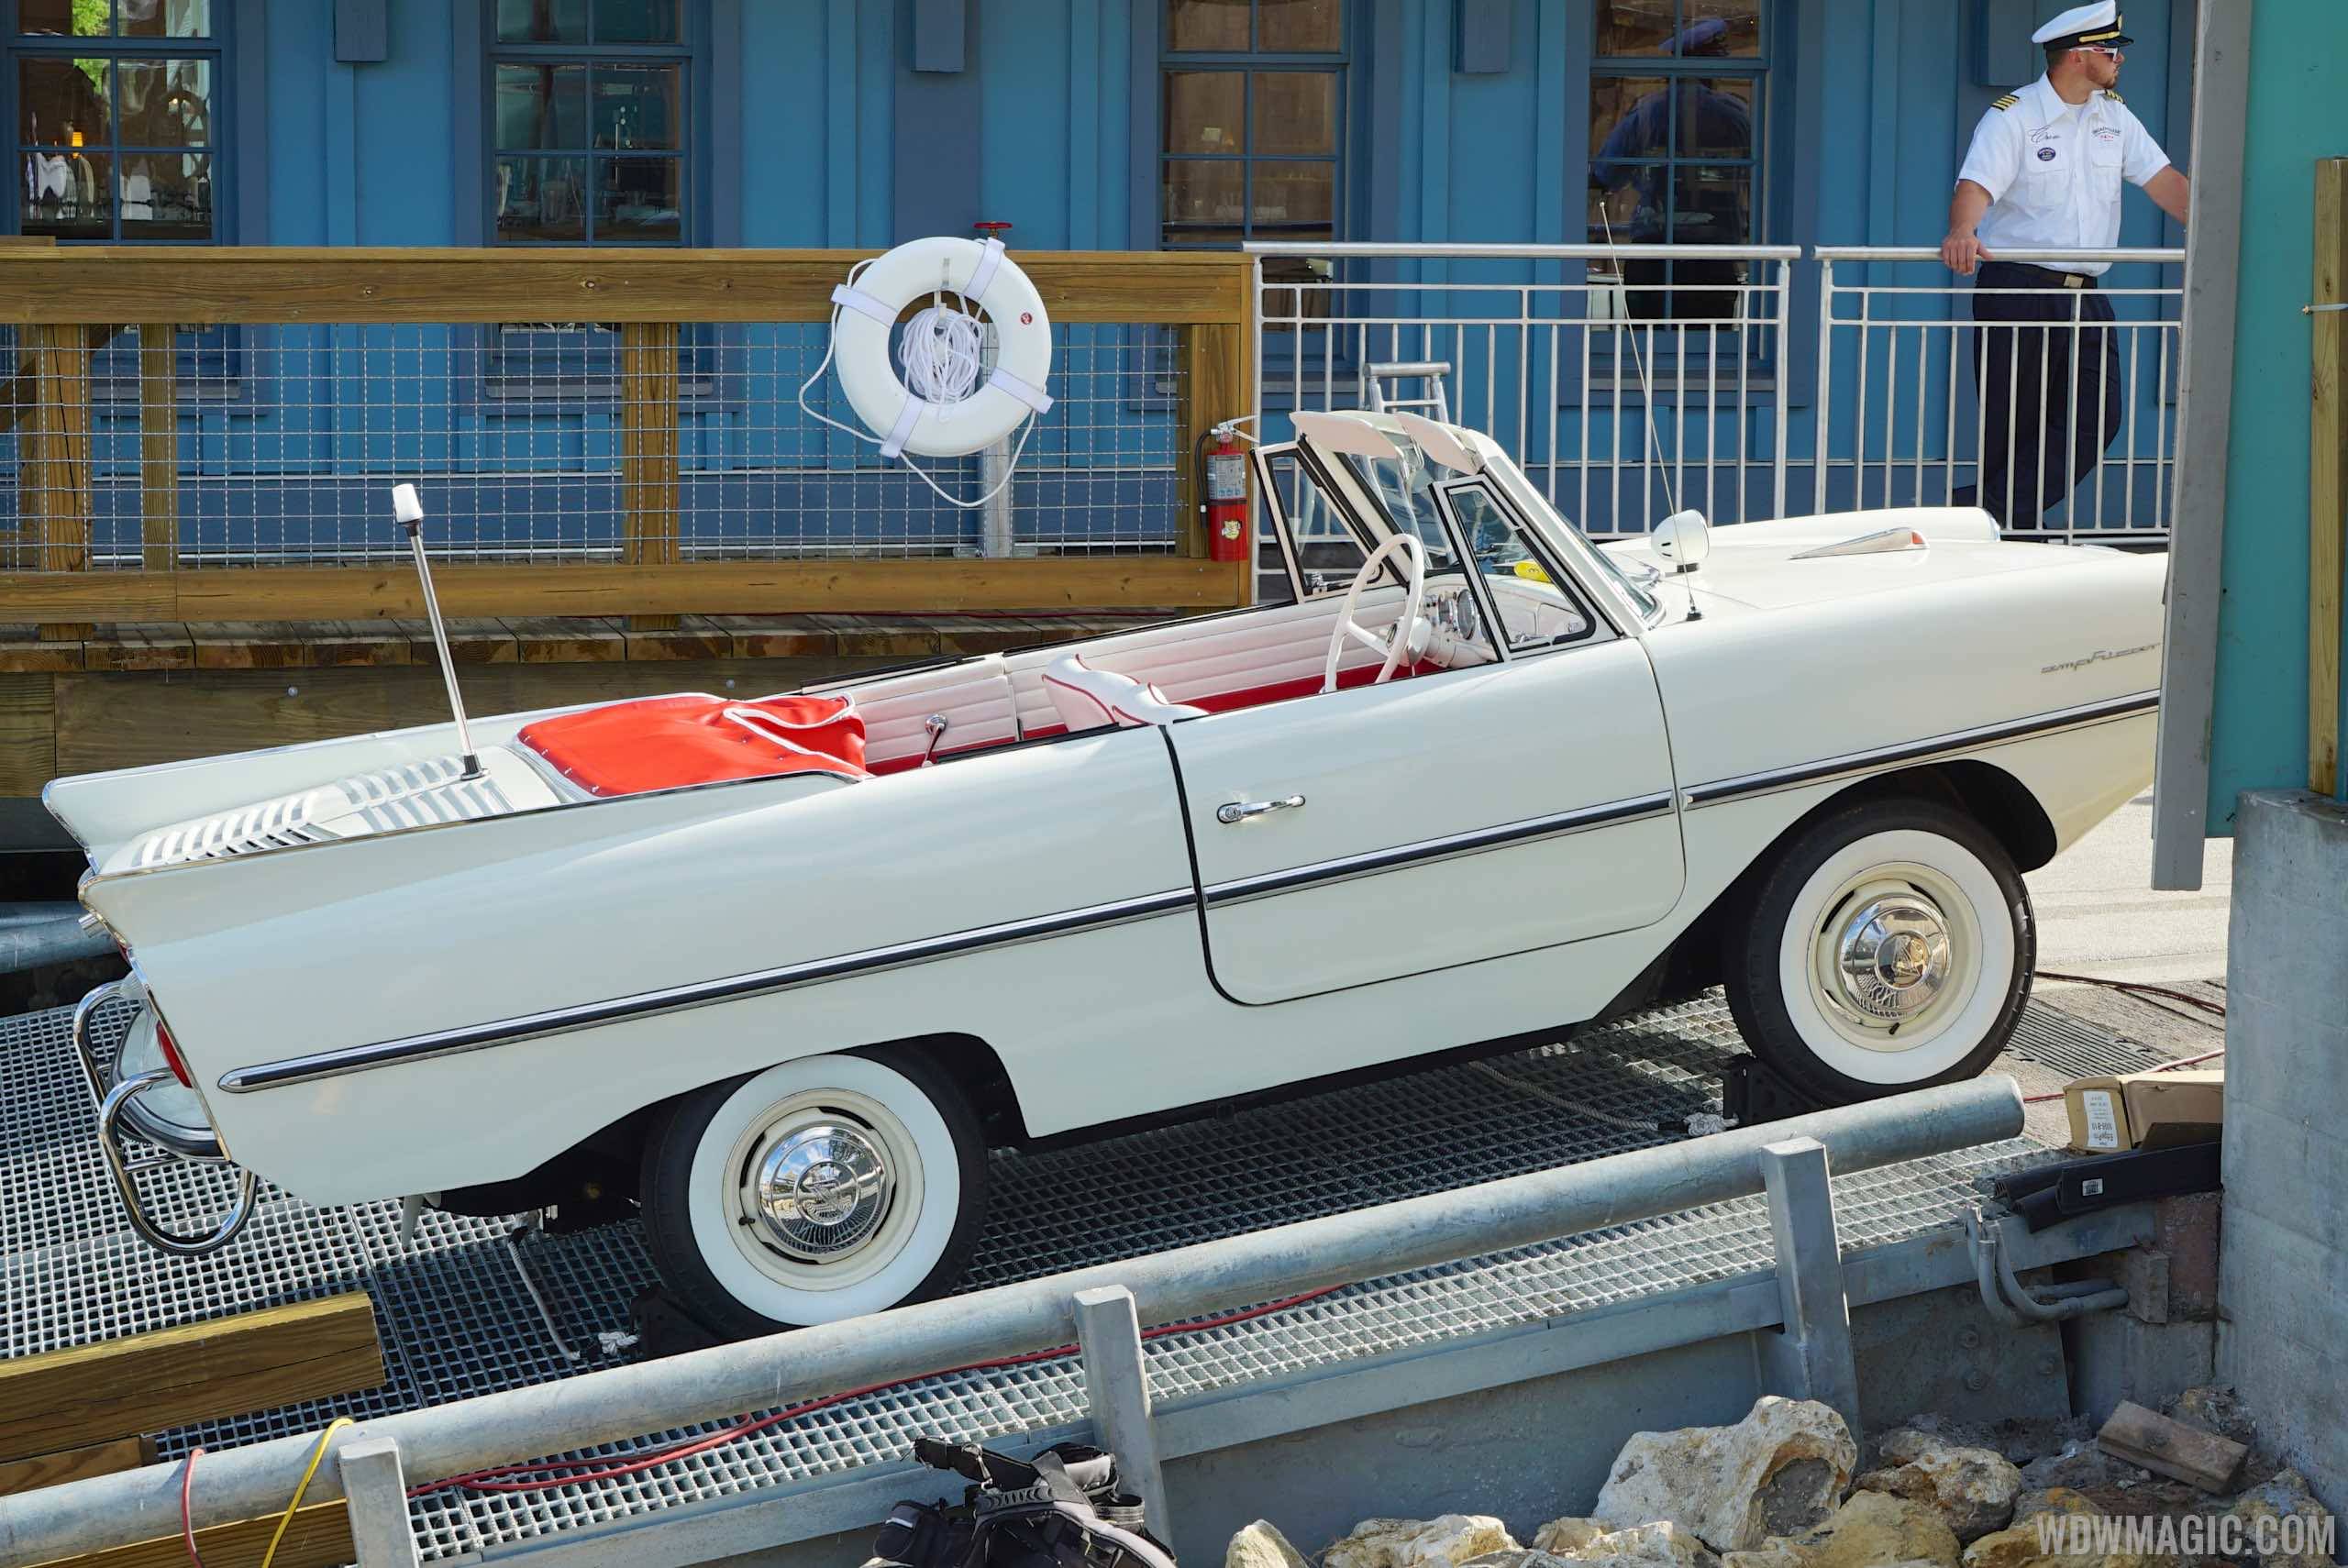 Amphicar at The BOATHOUSE